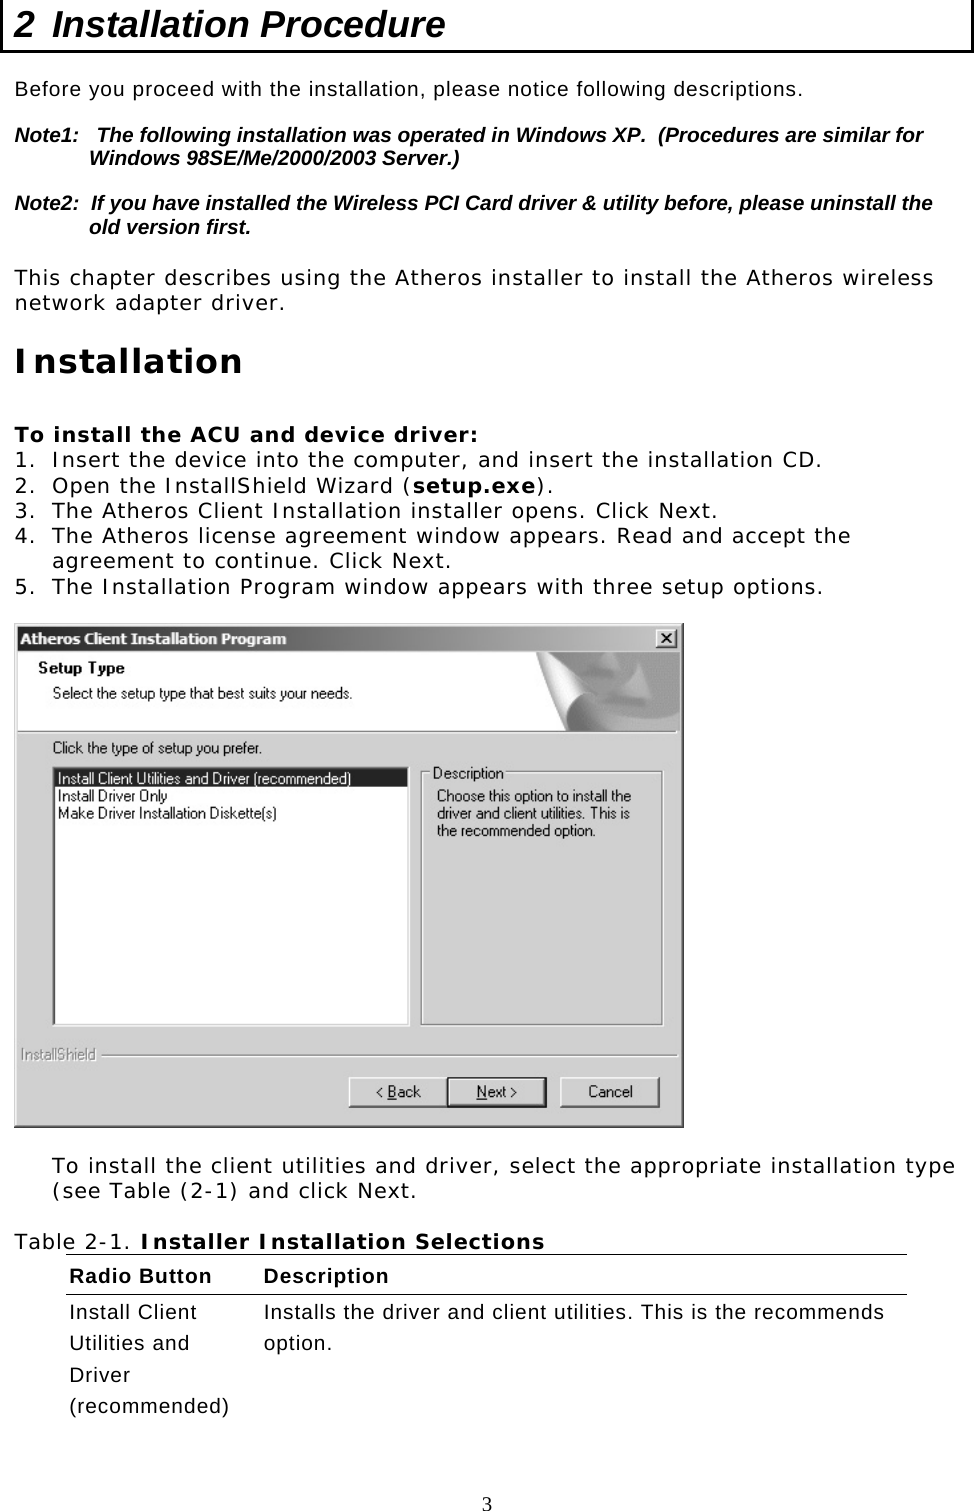  3 2  Installation Procedure  Before you proceed with the installation, please notice following descriptions. Note1:   The following installation was operated in Windows XP.  (Procedures are similar for Windows 98SE/Me/2000/2003 Server.) Note2:  If you have installed the Wireless PCI Card driver &amp; utility before, please uninstall the old version first.  This chapter describes using the Atheros installer to install the Atheros wireless network adapter driver.  Installation  To install the ACU and device driver: 1.  Insert the device into the computer, and insert the installation CD. 2.  Open the InstallShield Wizard (setup.exe). 3.  The Atheros Client Installation installer opens. Click Next. 4.  The Atheros license agreement window appears. Read and accept the agreement to continue. Click Next. 5.  The Installation Program window appears with three setup options.    To install the client utilities and driver, select the appropriate installation type (see Table (2-1) and click Next.  Table 2-1. Installer Installation Selections Radio Button  Description Install Client Utilities and Driver (recommended) Installs the driver and client utilities. This is the recommends option.    